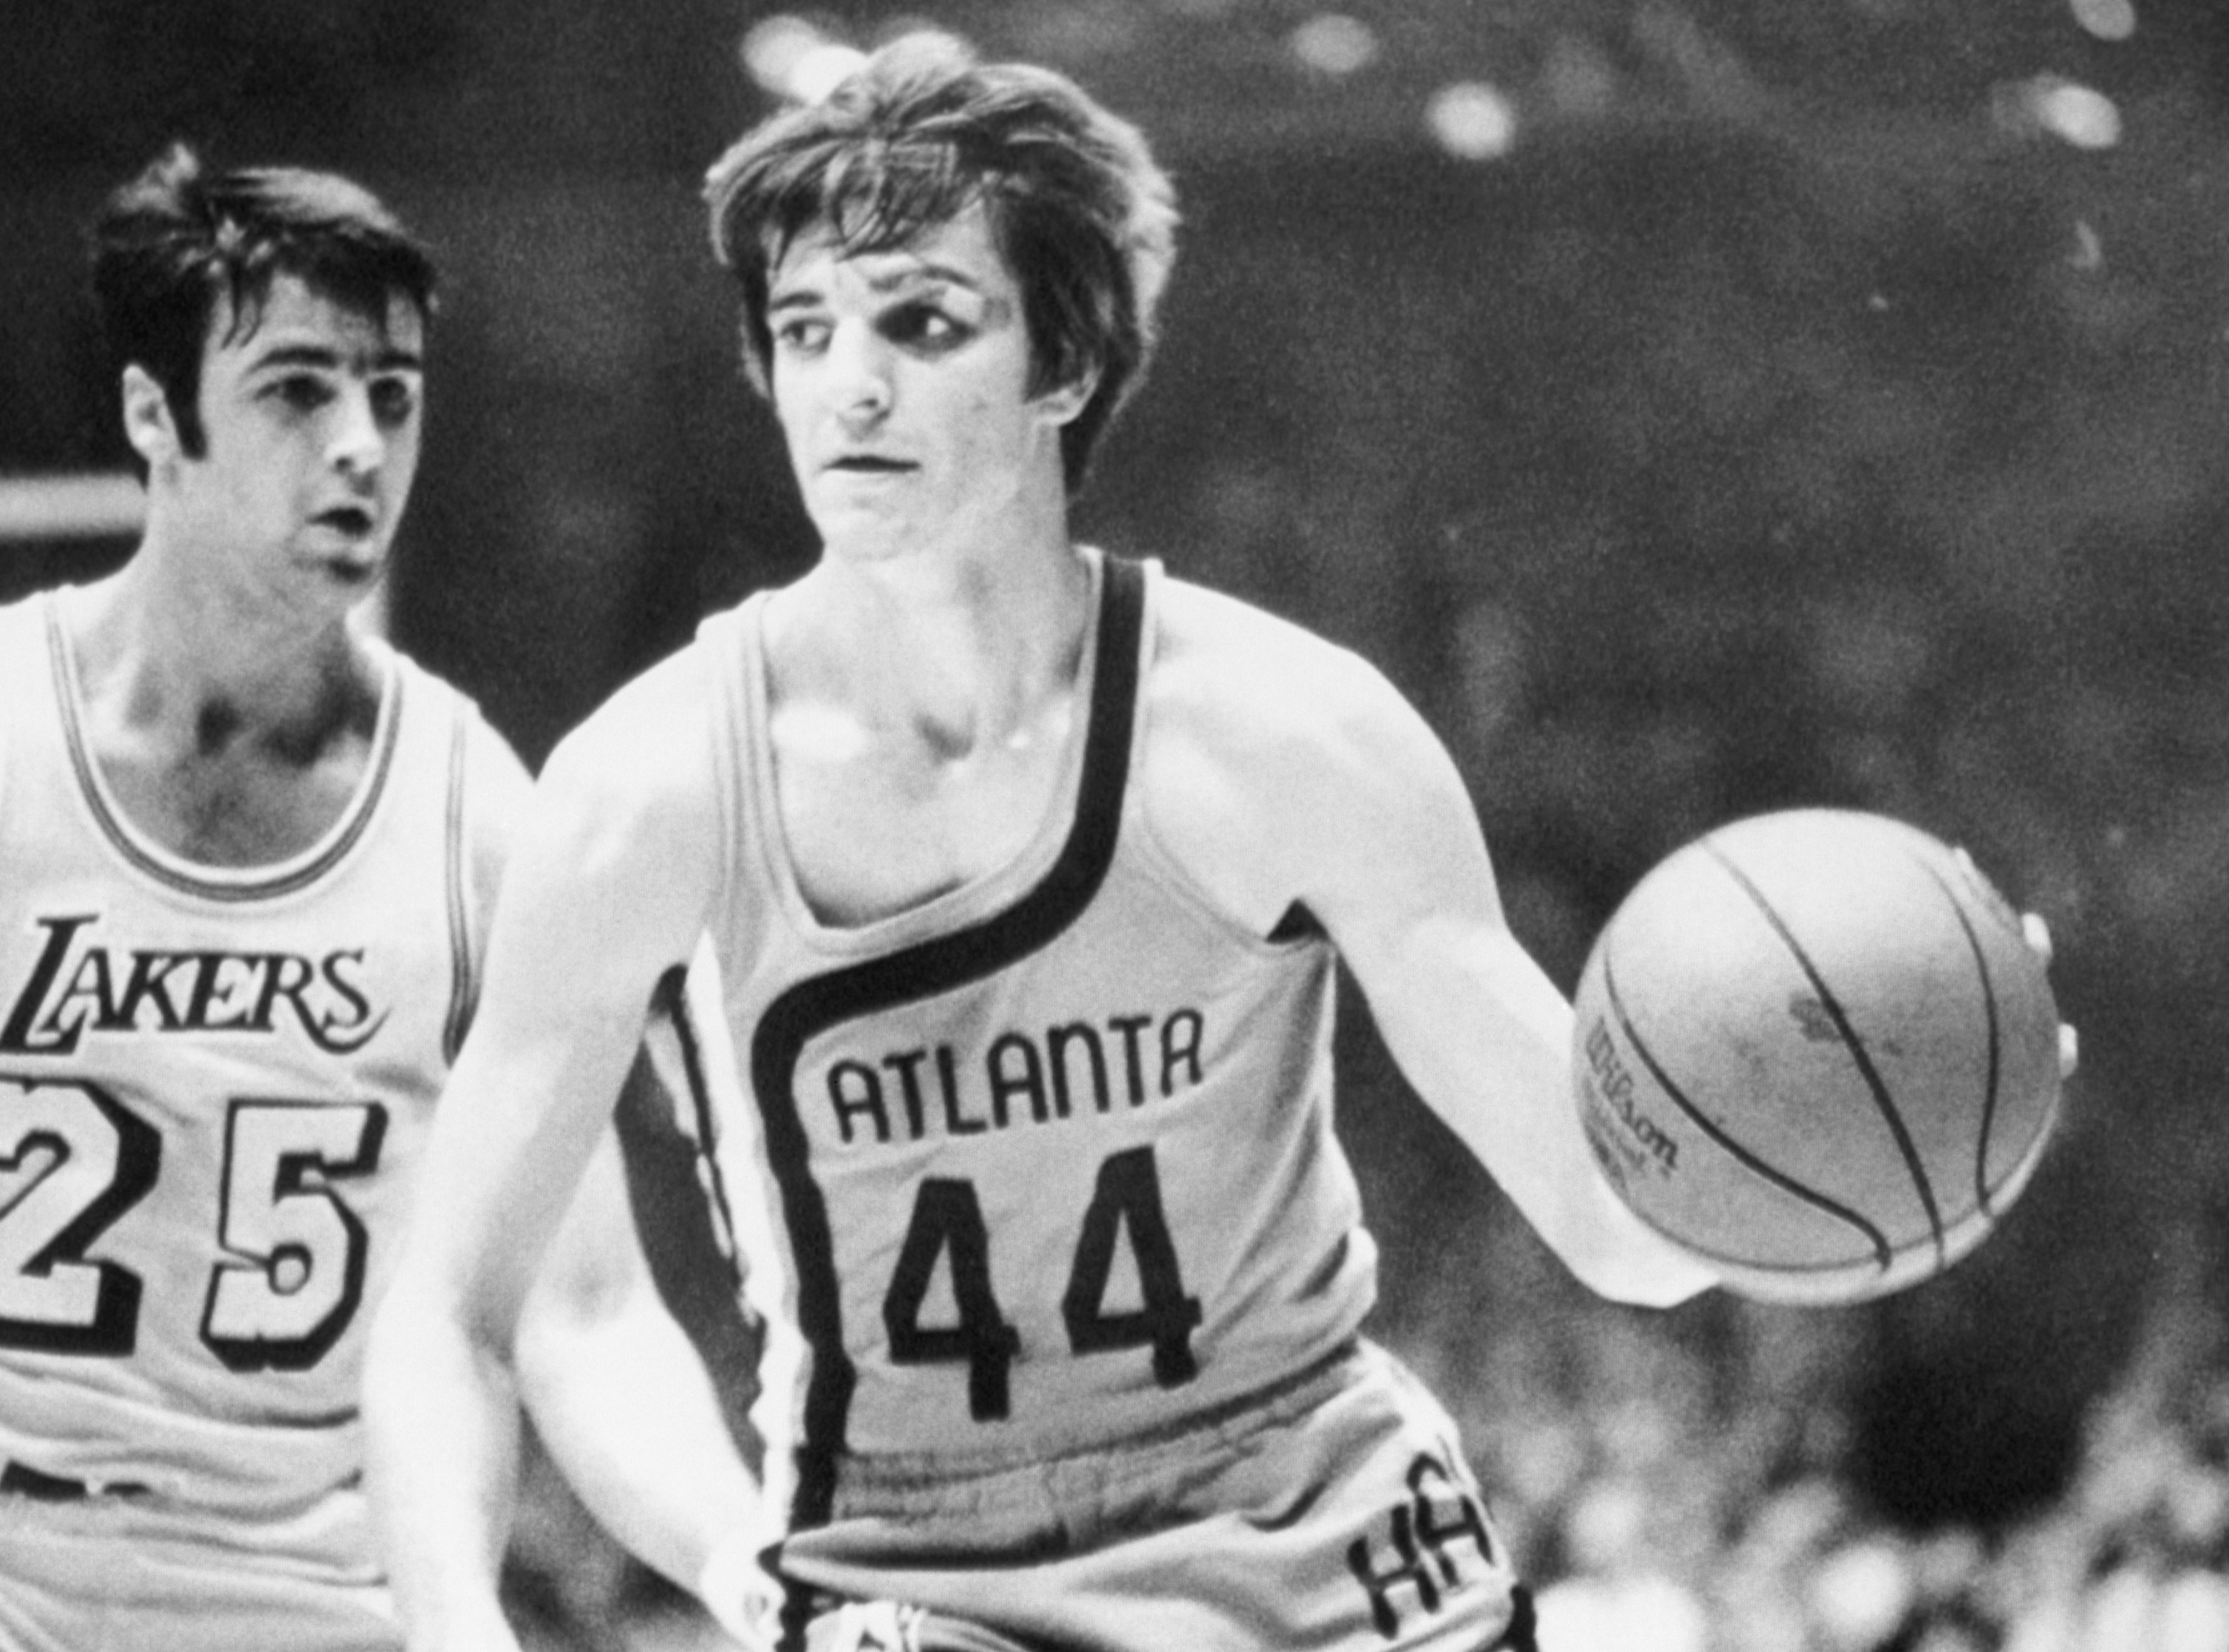 How Did Pete Maravich Get the Nickname ‘Pistol Pete?’